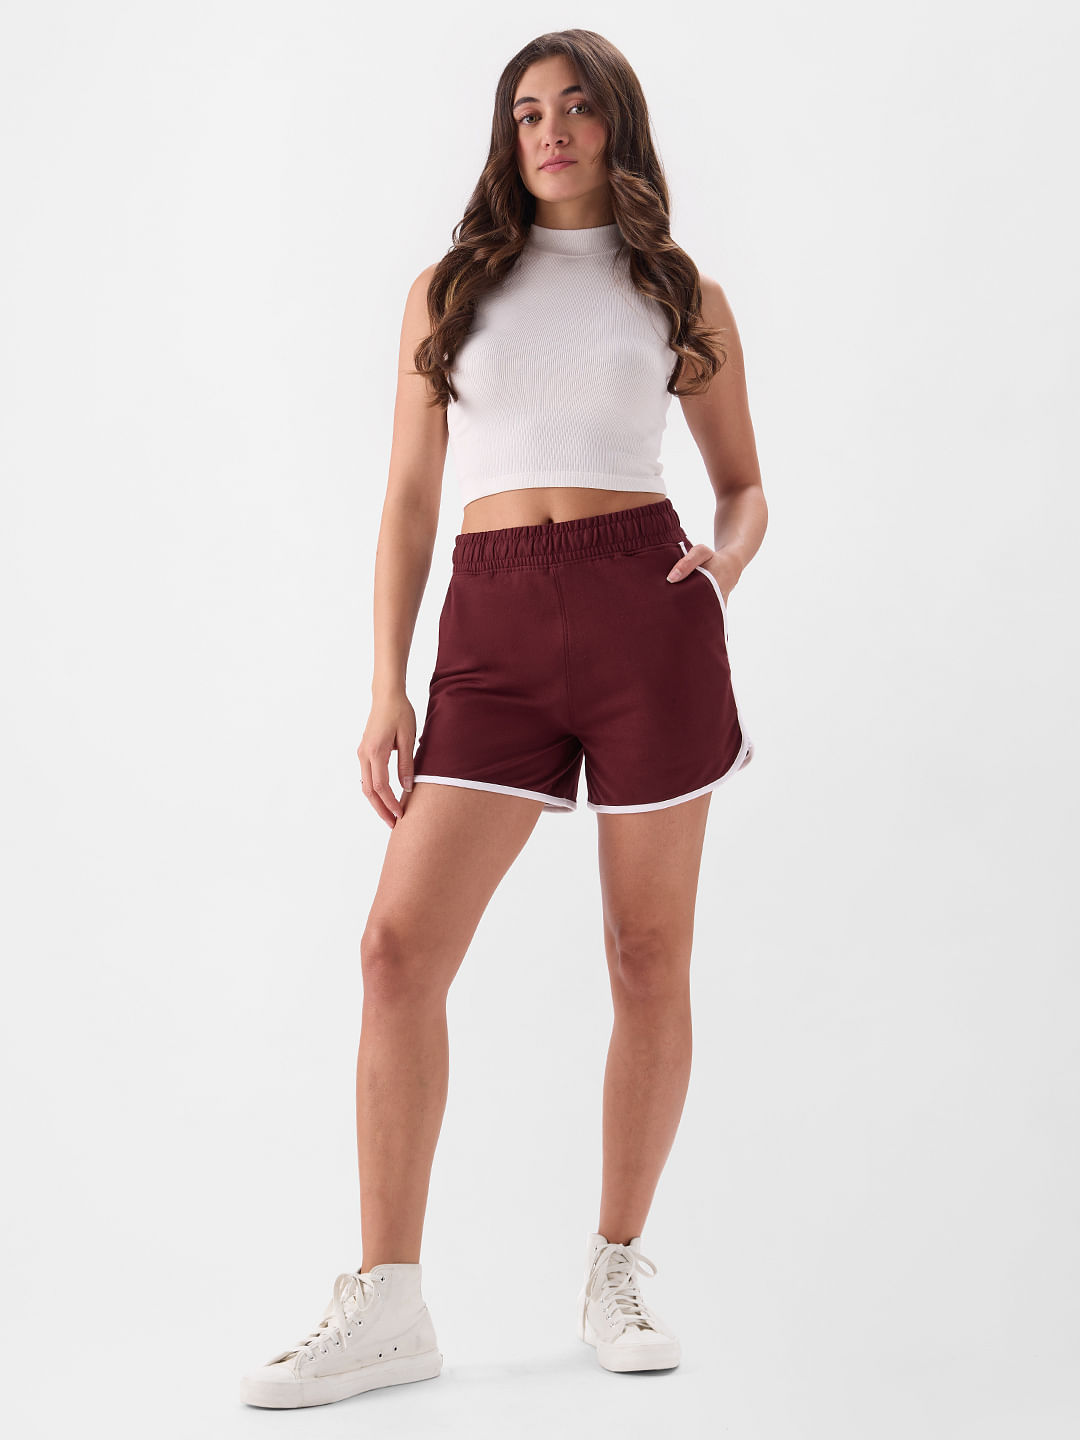 Buy Women's Shorts & Hot Pants Online at The Souled Store